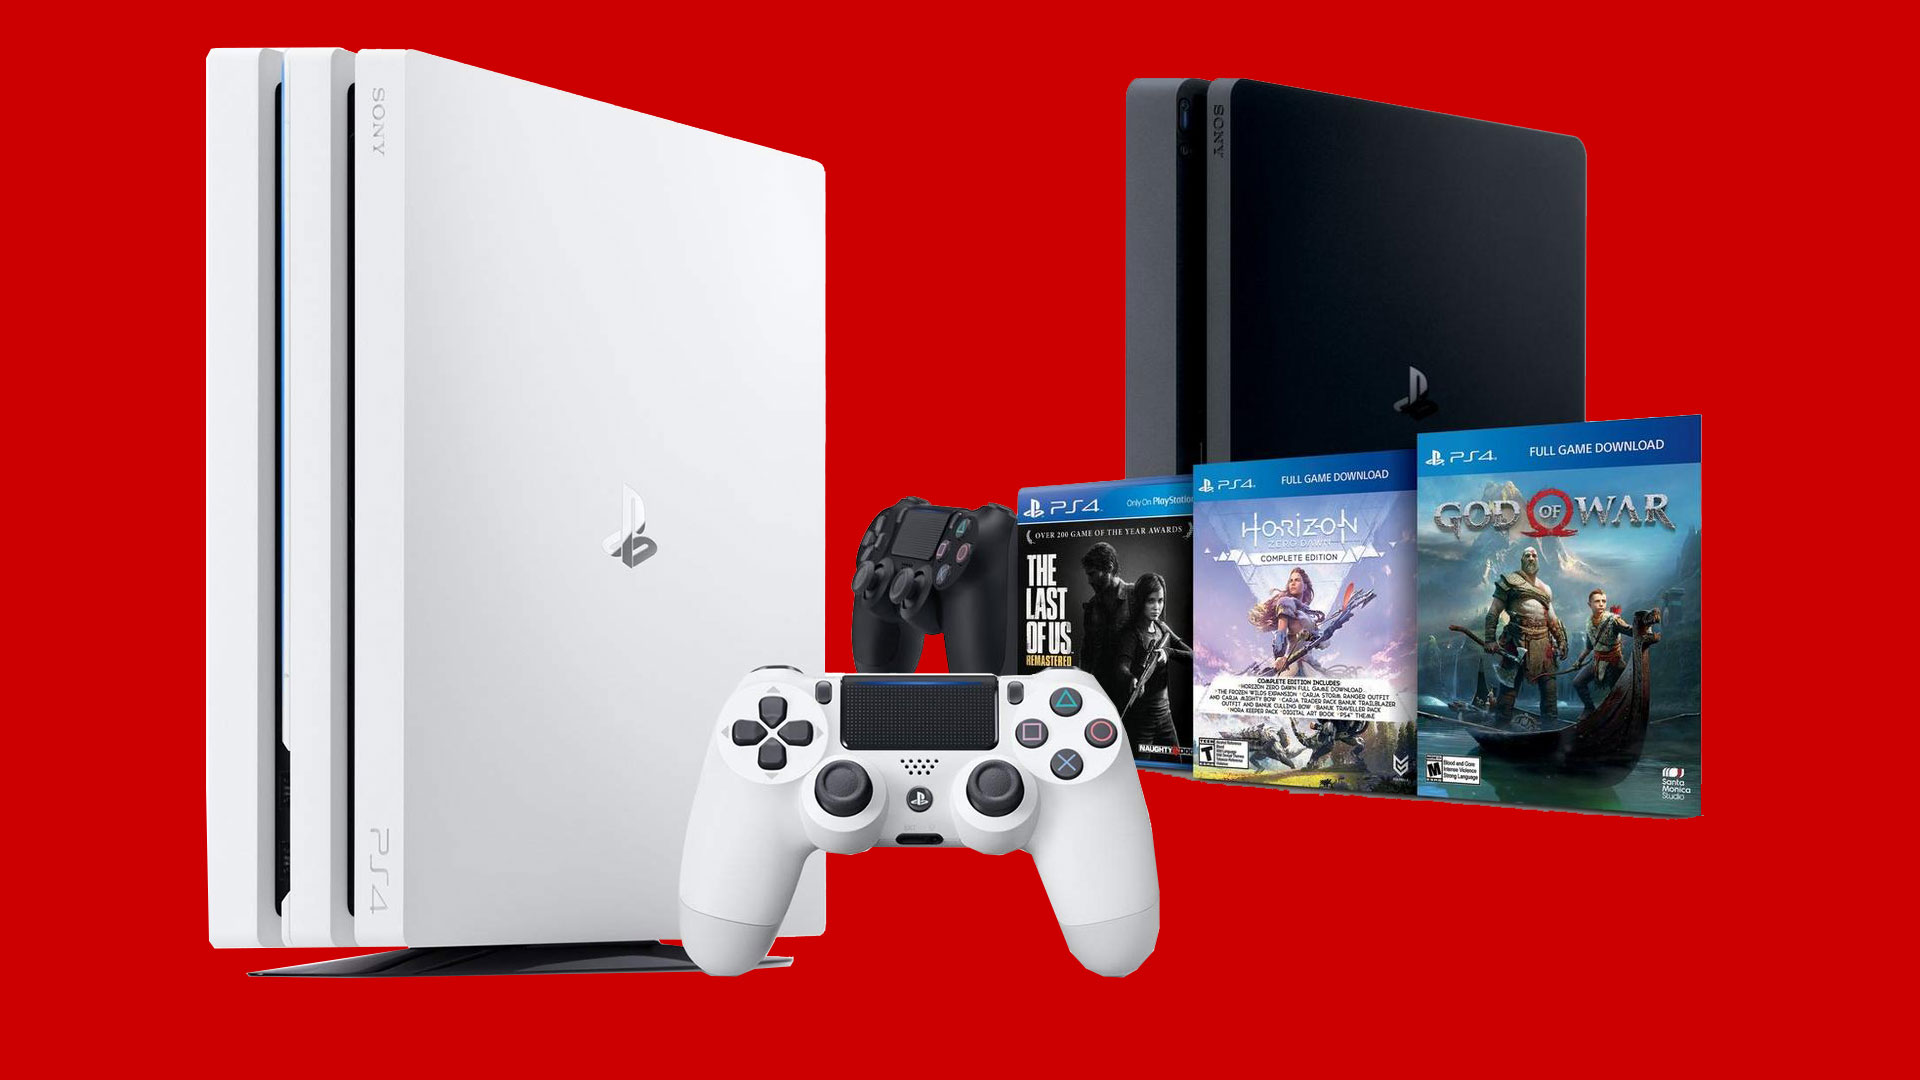 GameStop - Purchase a new PlayStation 4 Slim to get 12 months of PlayStation  Plus for free to enjoy free games for a year